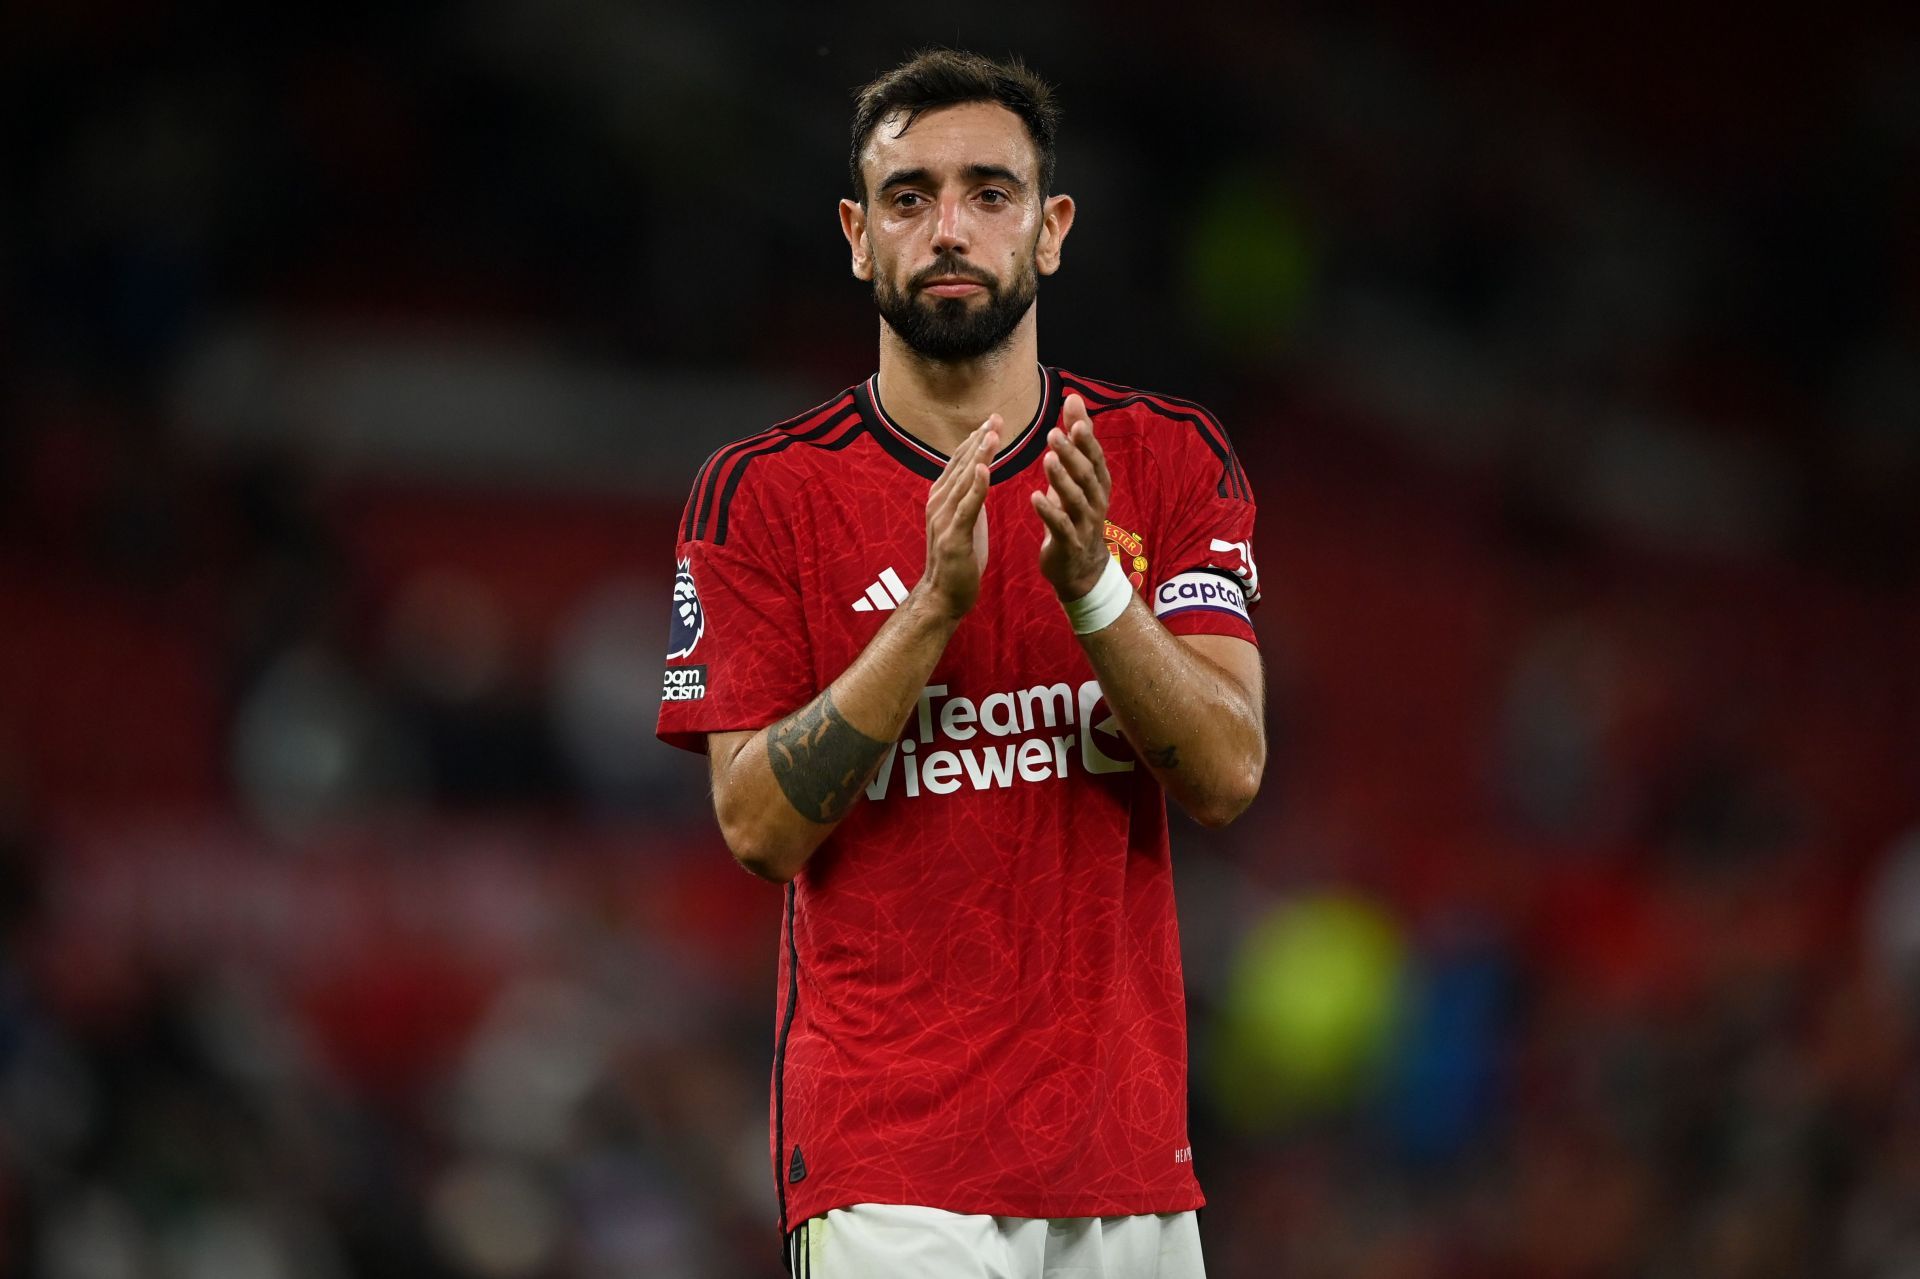 Bruno Fernandes accepts that his side slipped up in the second half.